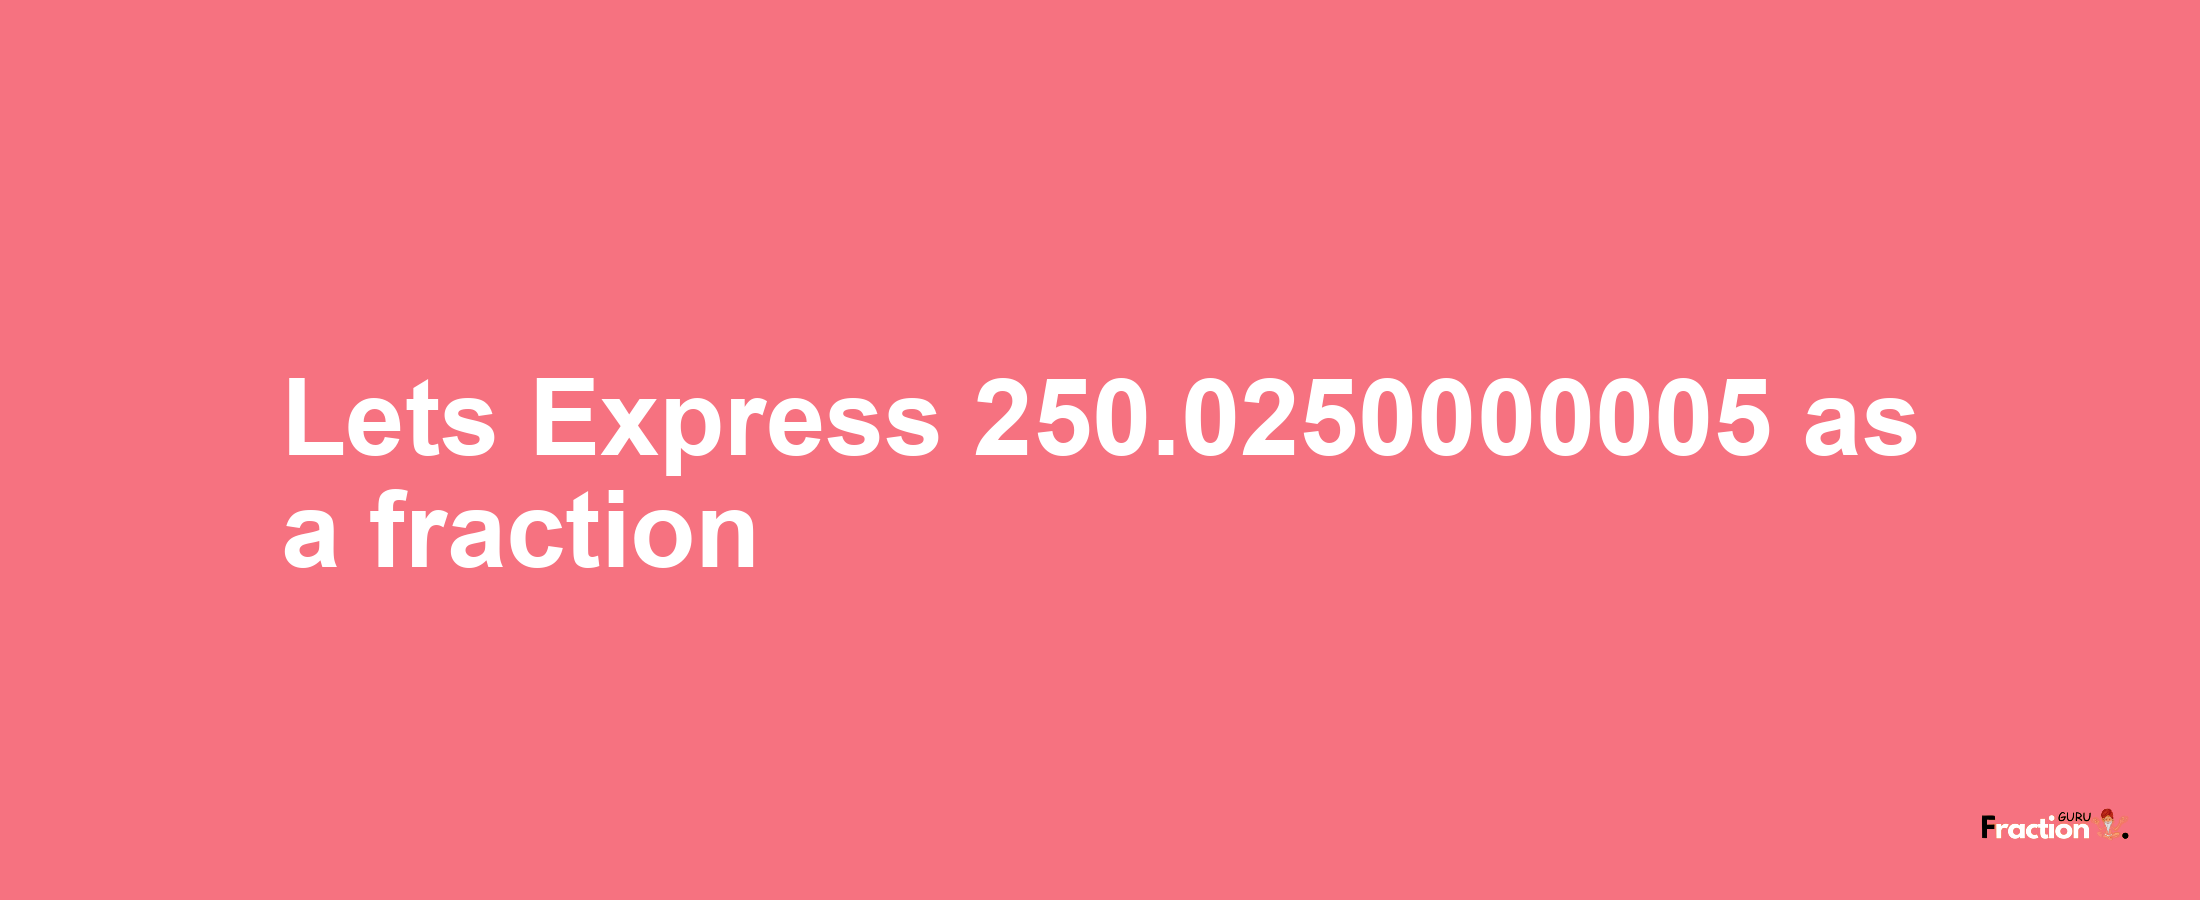 Lets Express 250.0250000005 as afraction